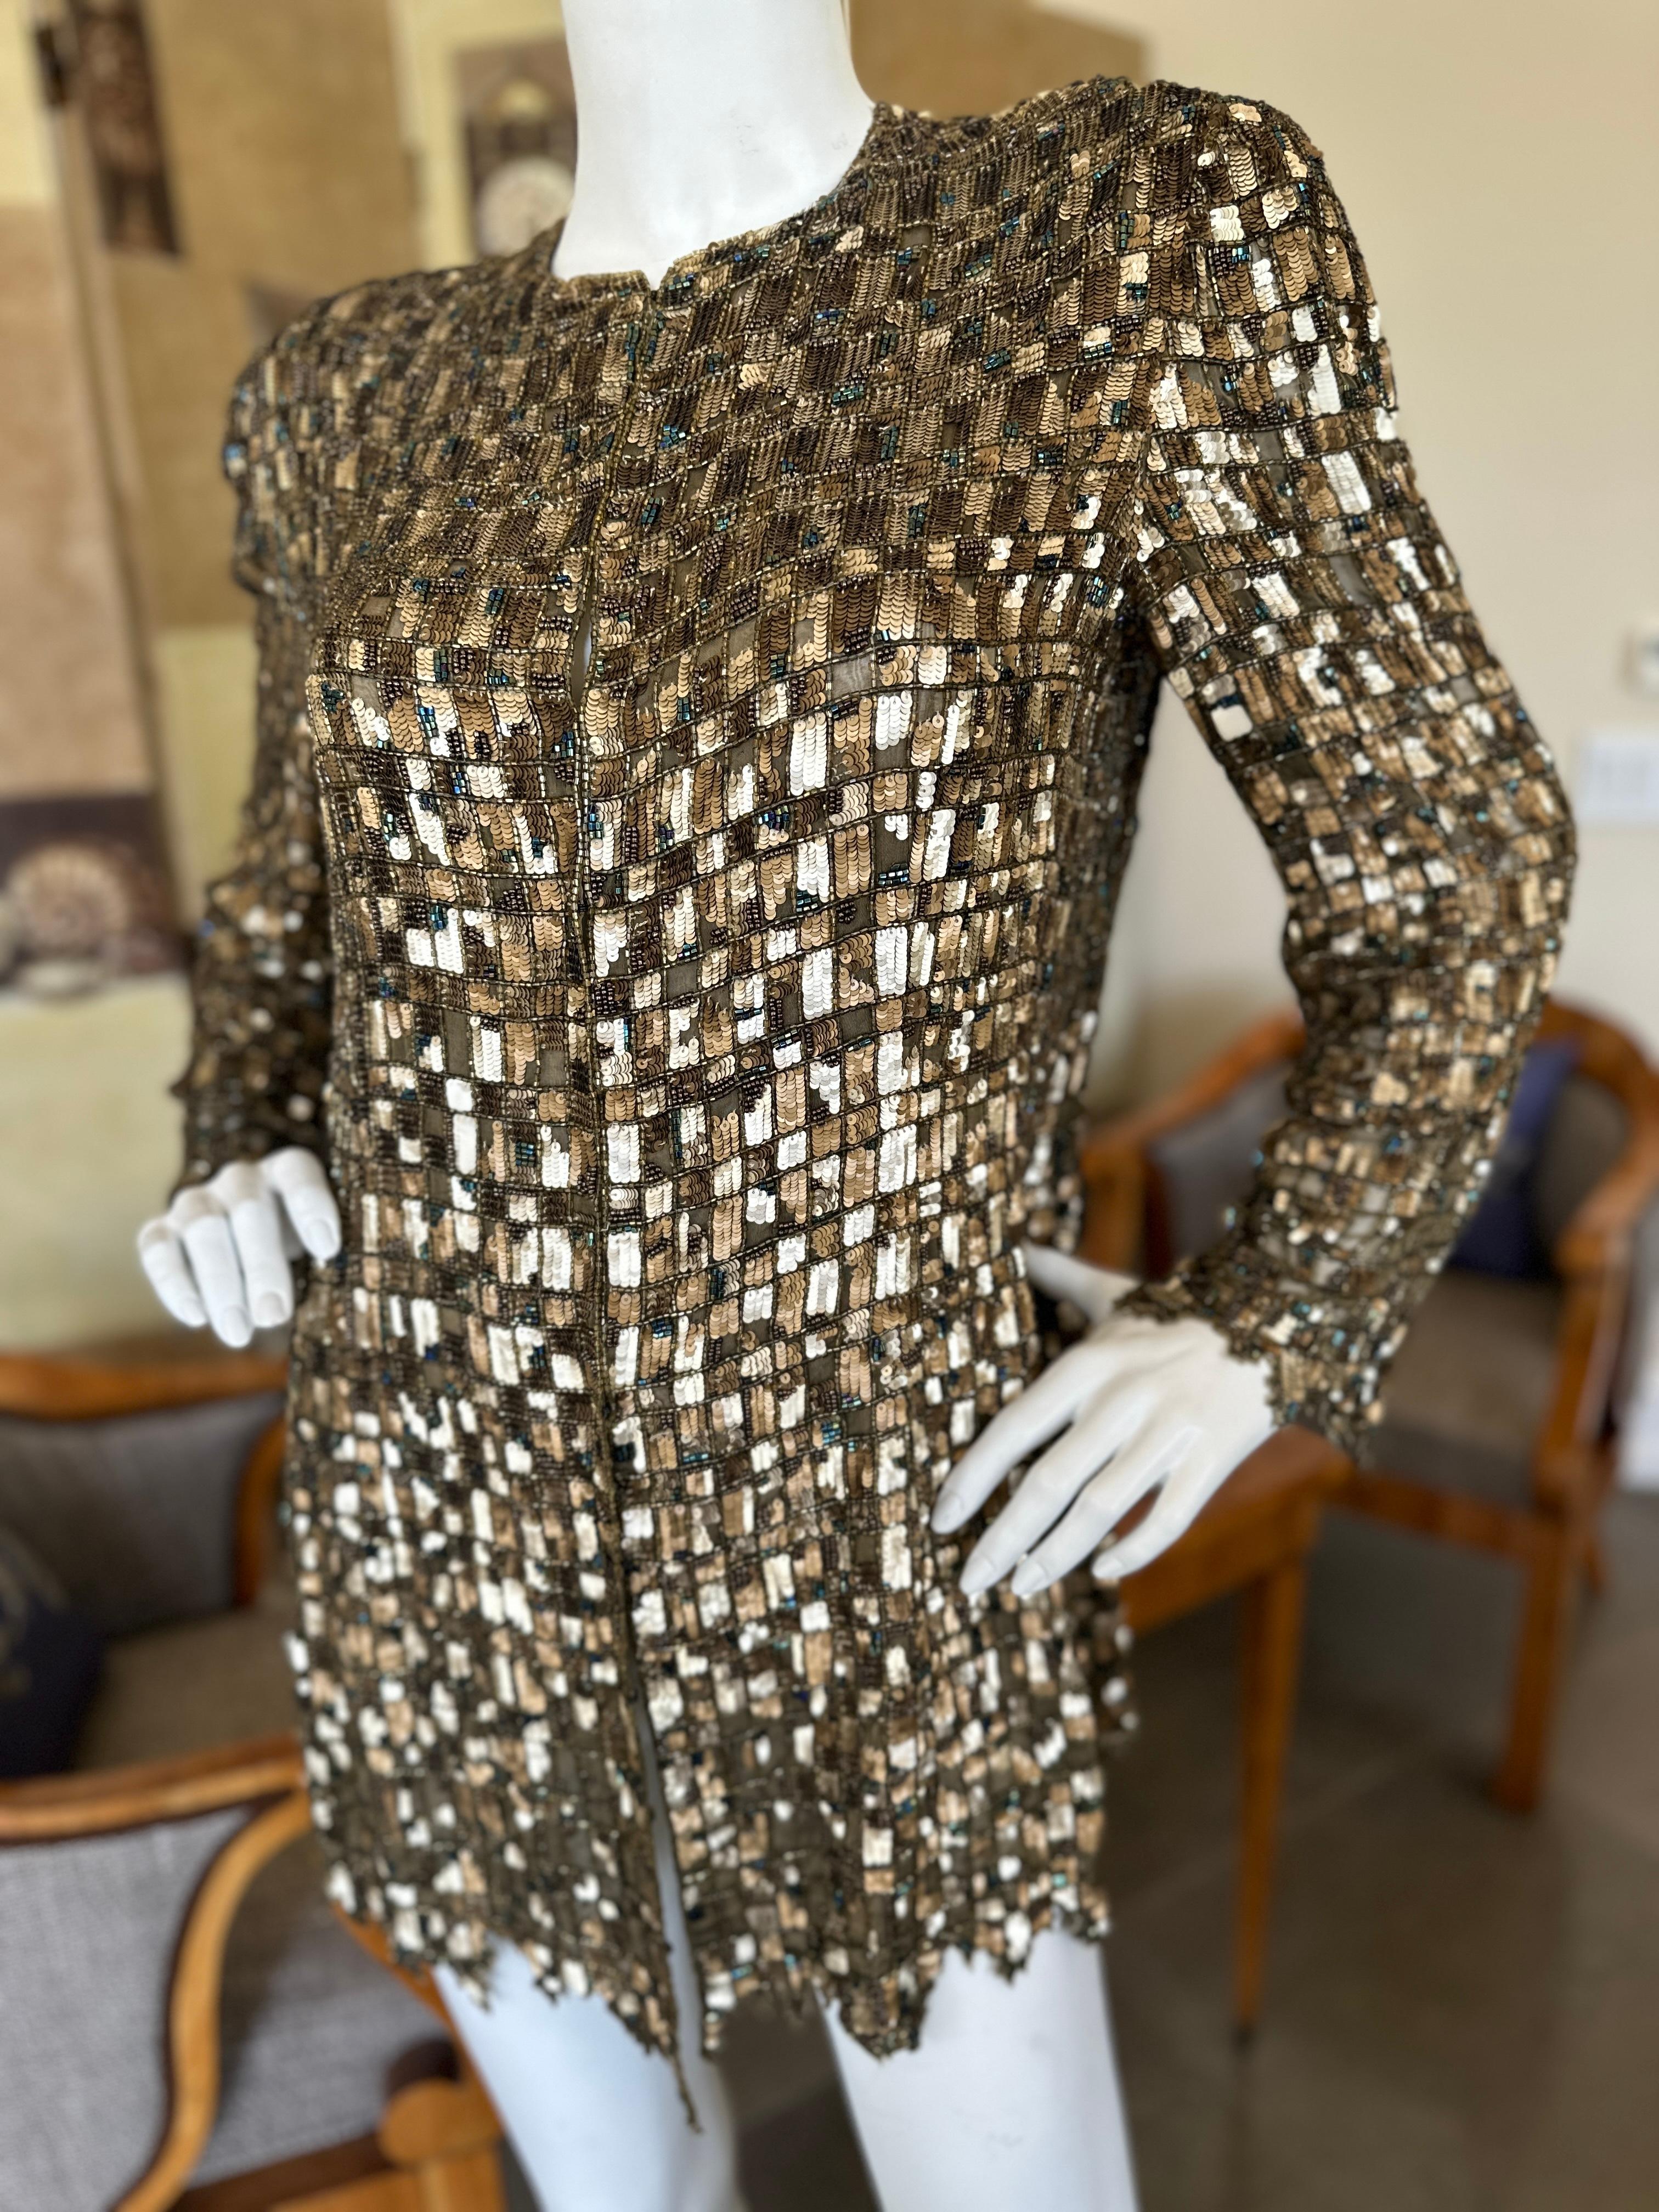 Bill Blass Exquisite Mosaic Beaded Jacket / Mini Dress from 1999 In Excellent Condition For Sale In Cloverdale, CA